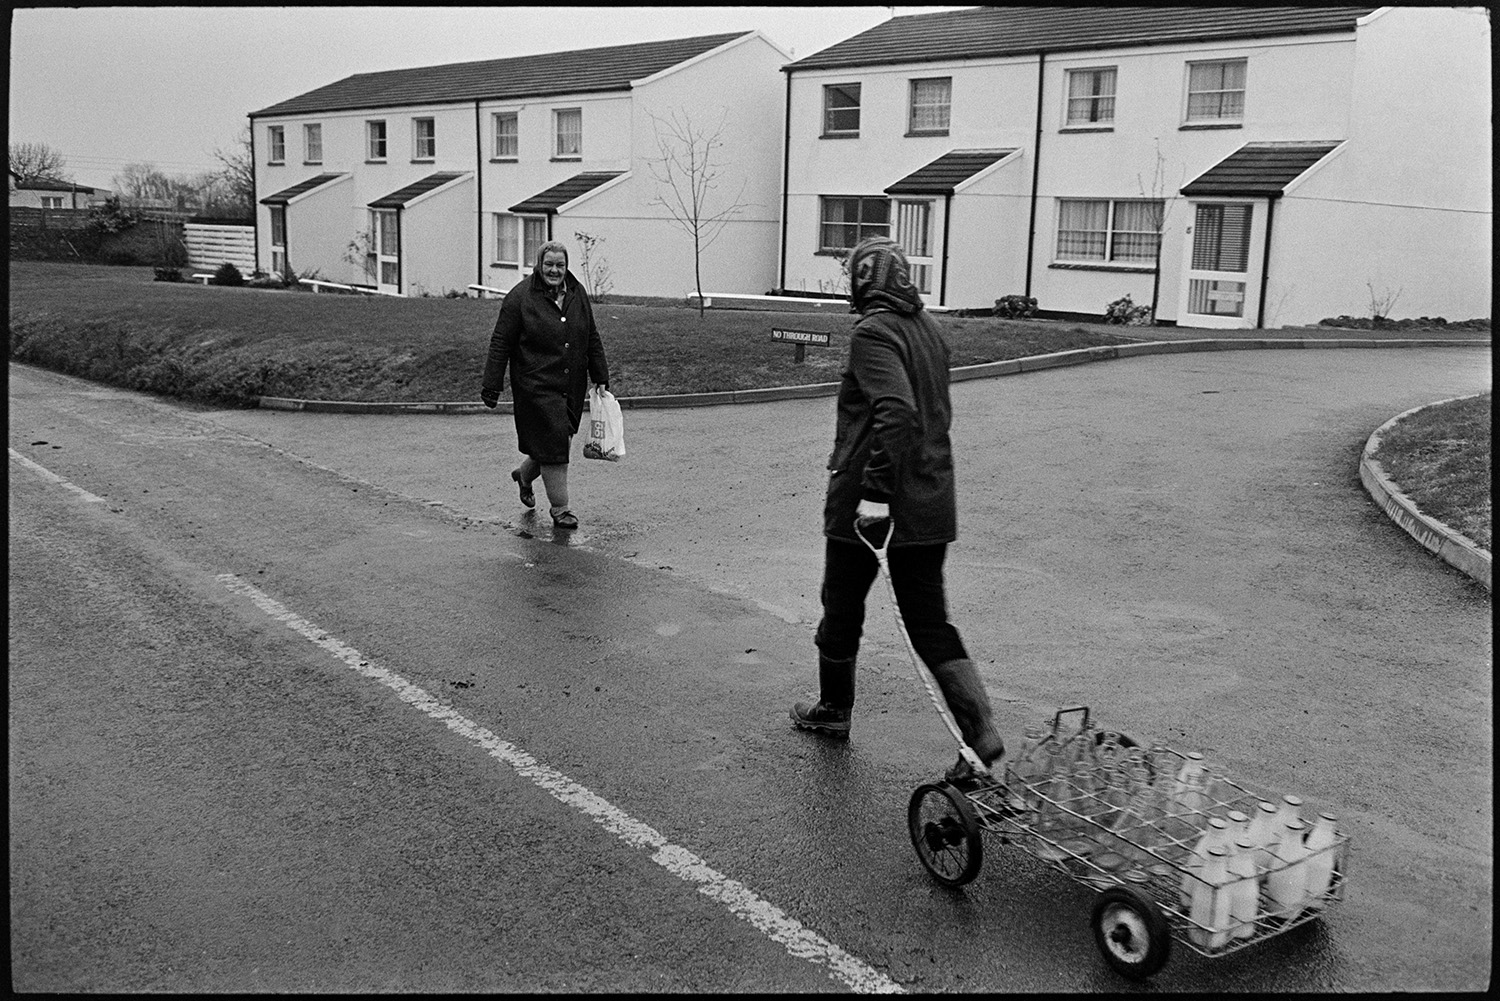 Woman delivering milk round village. <br />
[Jane Woolacott delivering milk to houses in Atherington. She is pulling a trolley with the milk bottles. Another woman is walking past her on the street.]